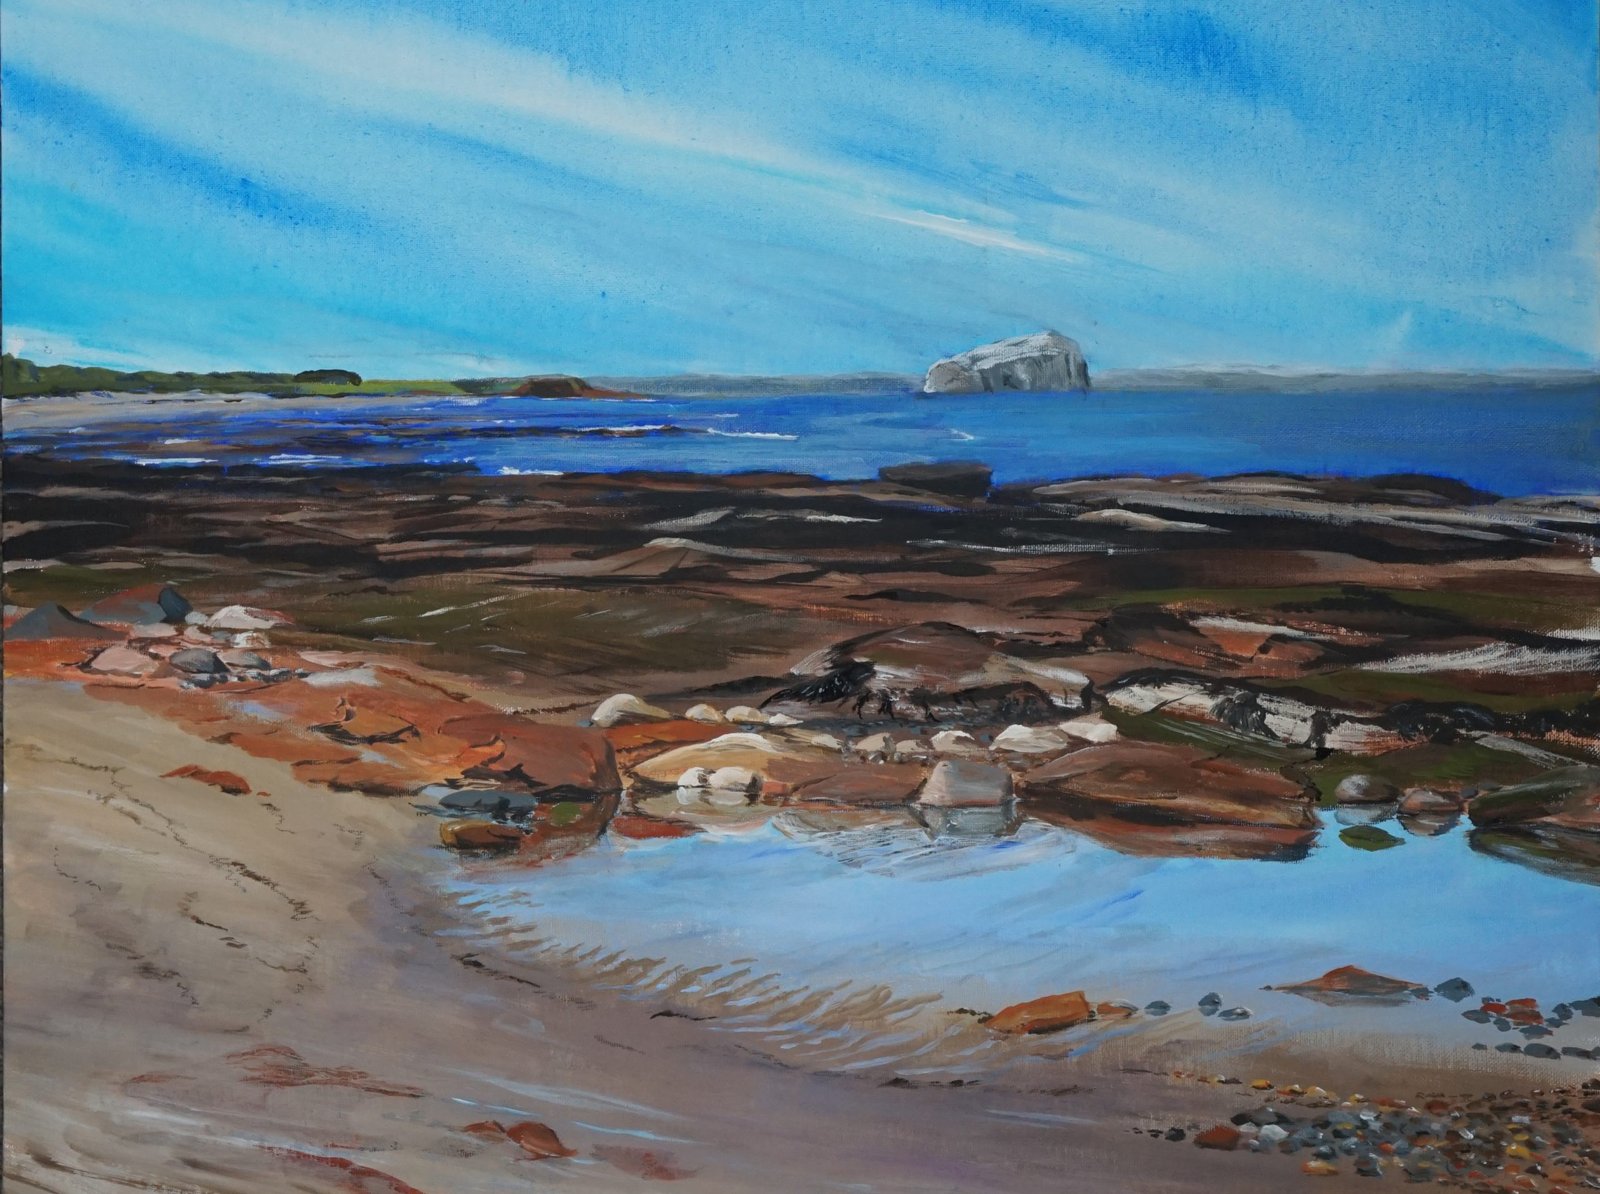 Bass Rock from St Baldred's Cradle. Framed fine art giclee print - ready to hang. FREE P&P IN UK